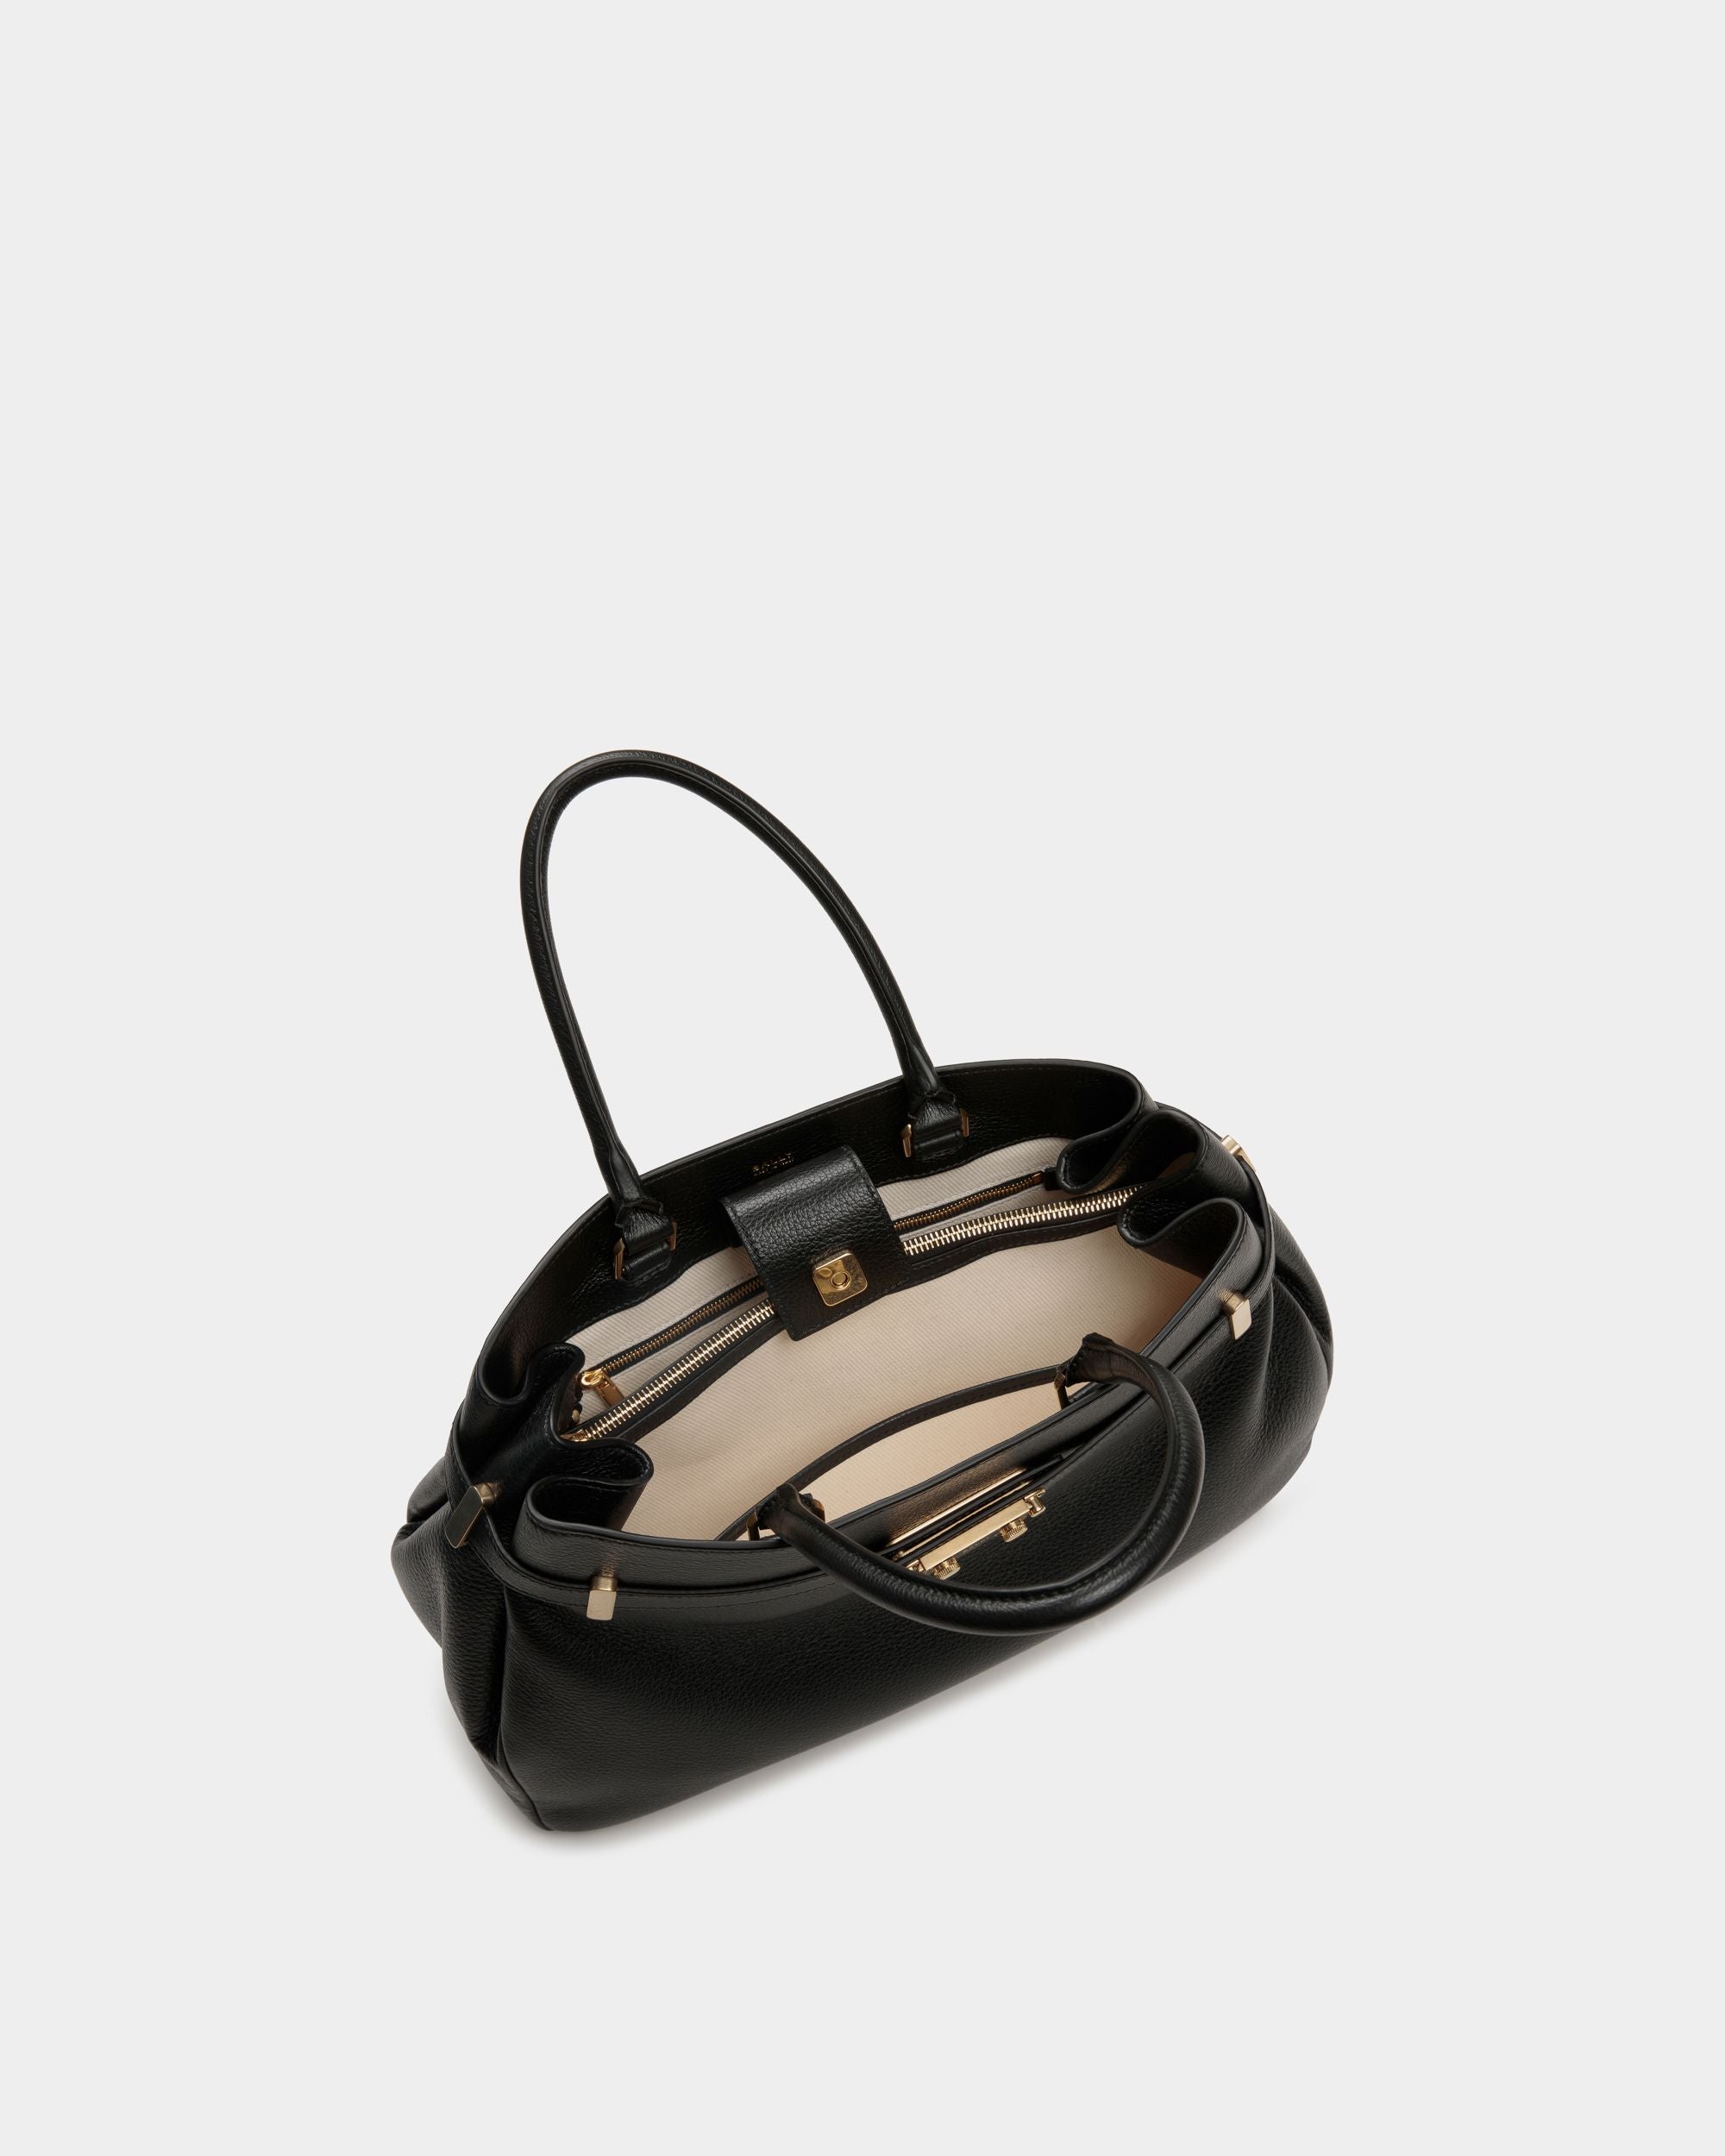 Carriage | Women's Tote in Black Leather | Bally | Still Life Open / Inside